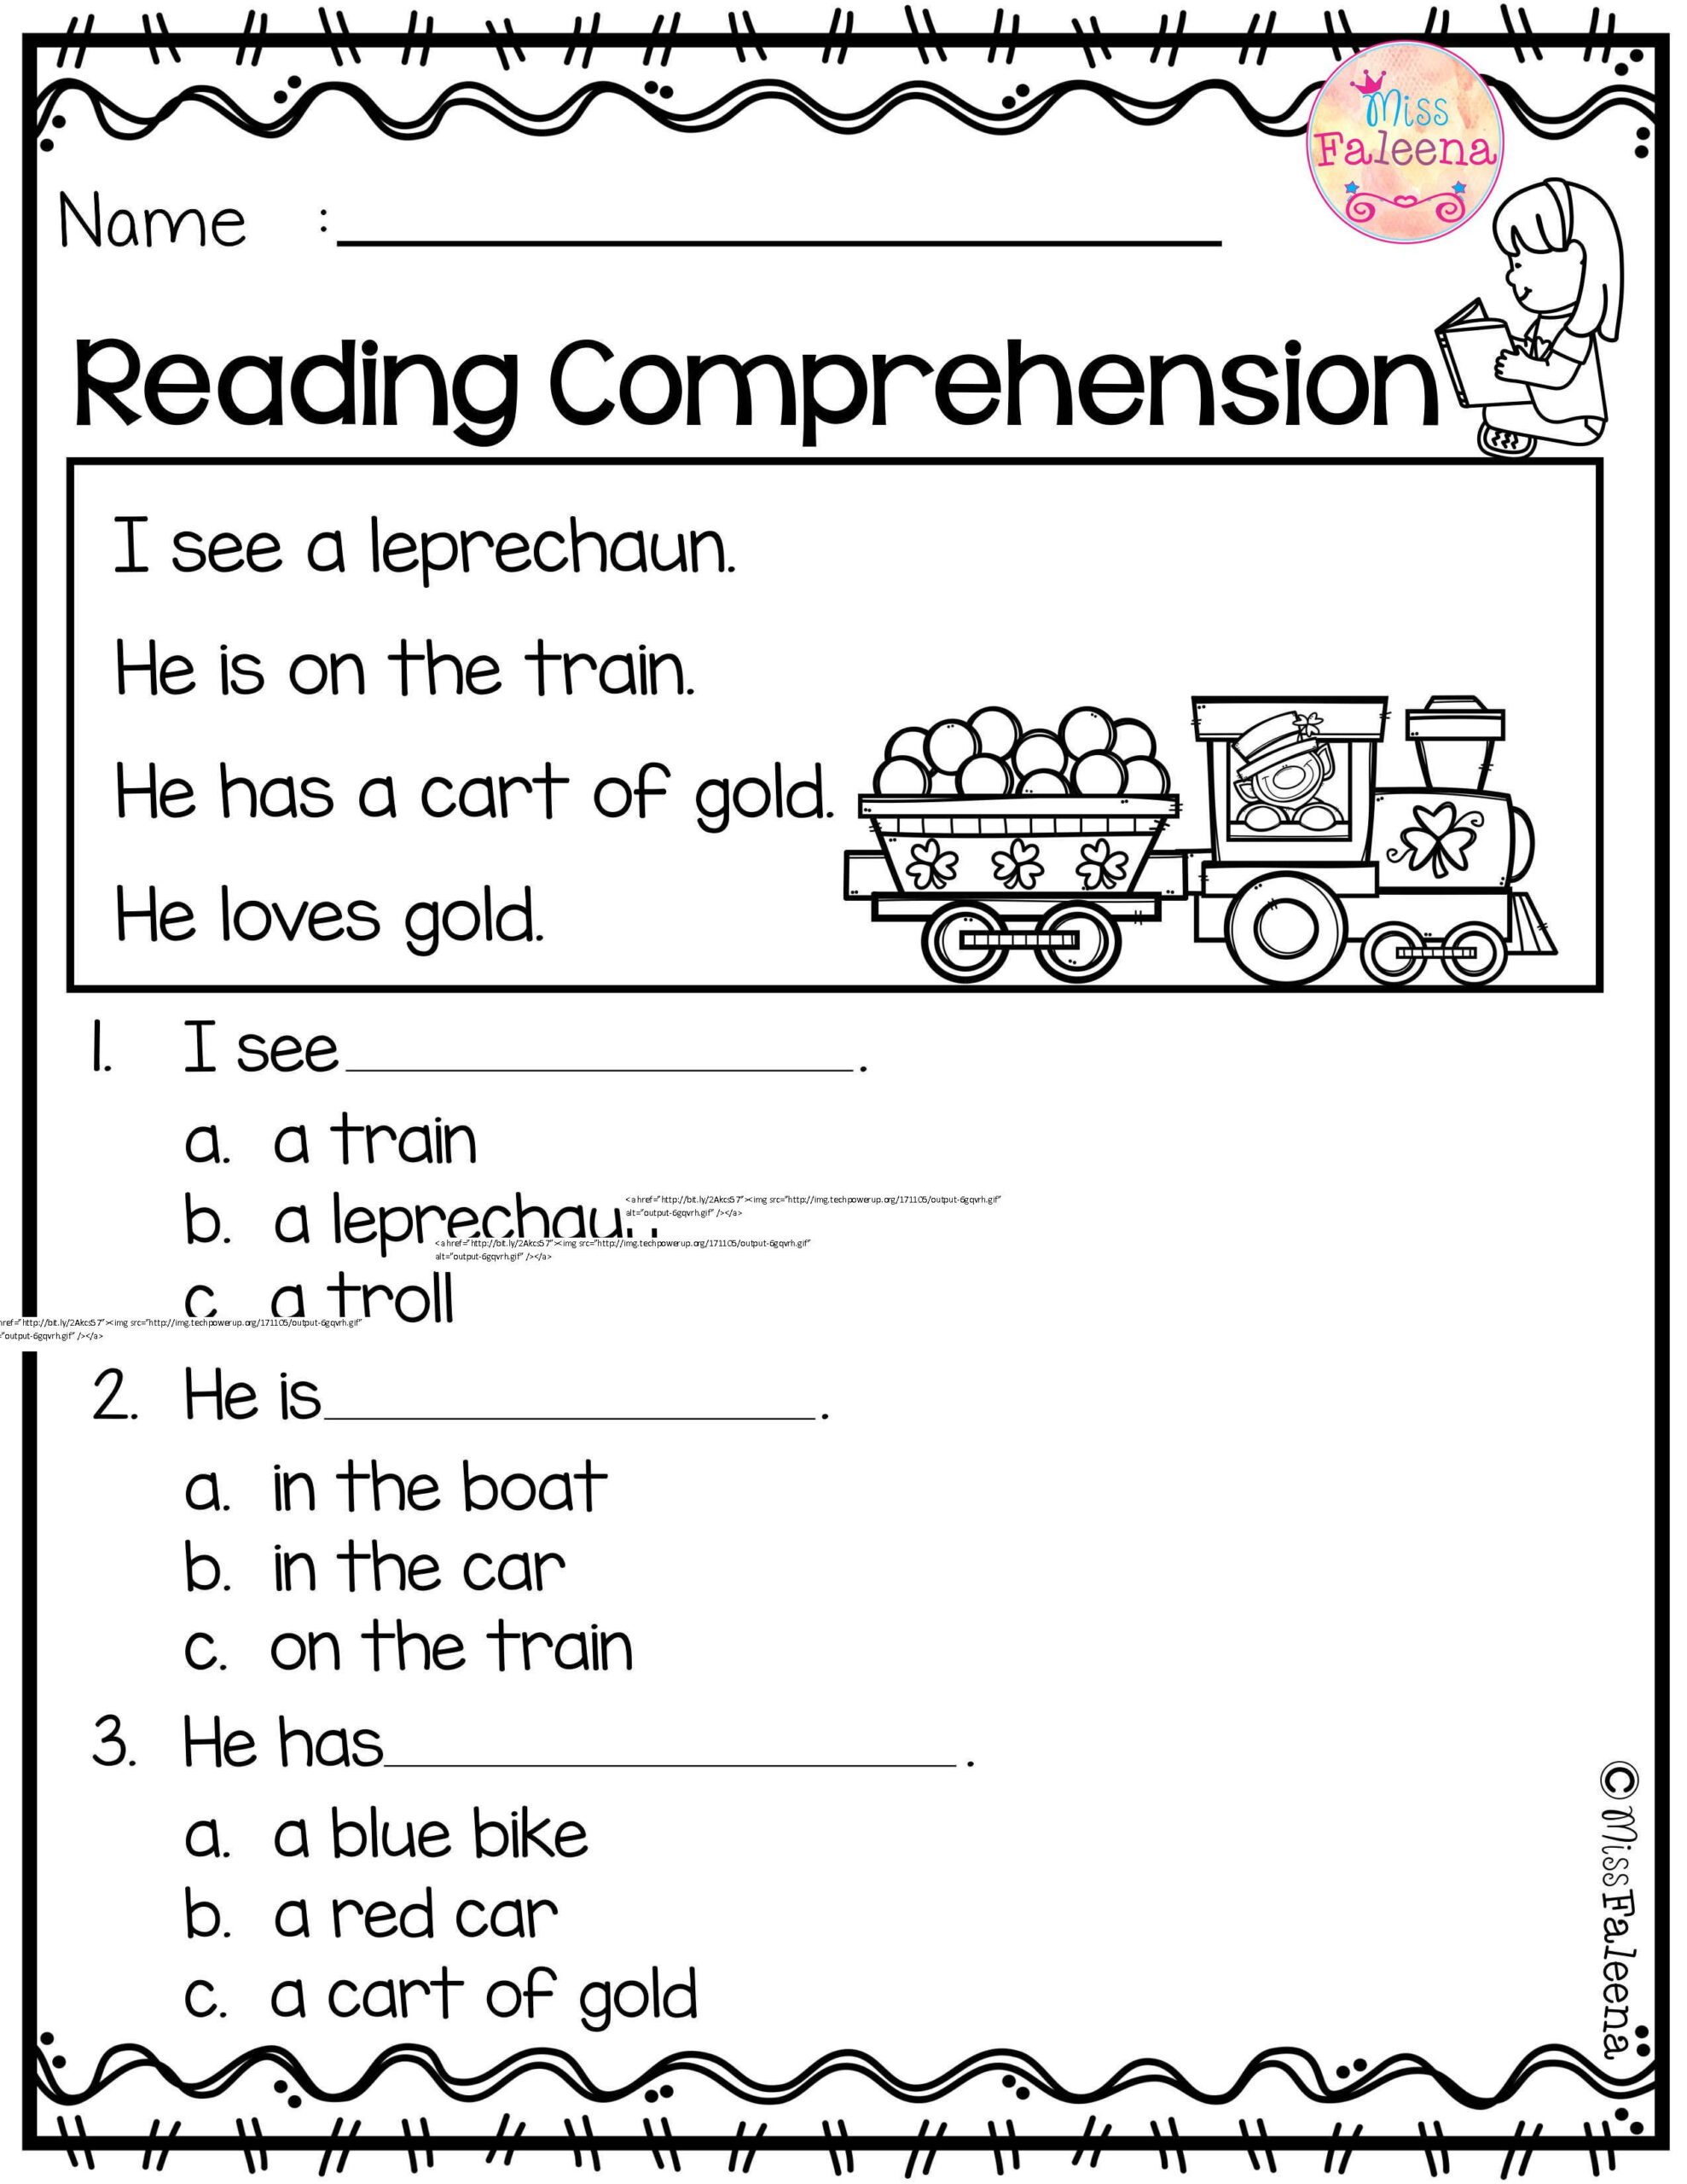 march-reading-comprehension-worksheets-reading-comprehension-worksheets